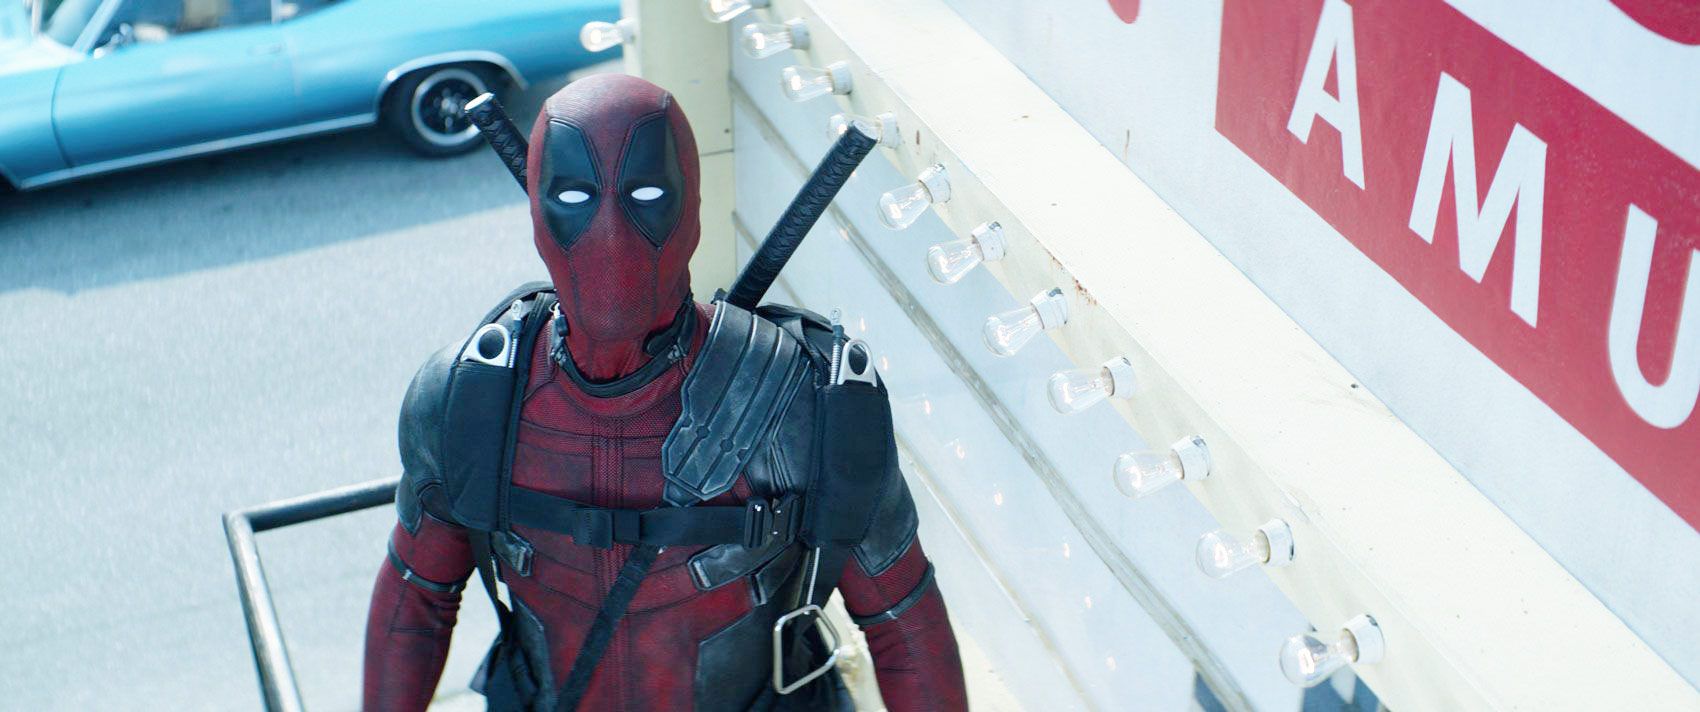 9. Deadpool 3: The majority of the Deadpool cast, including Reynolds, is said to be turned to dust by Thanos' snap. According to the report, Deadpool will be introduced to the MCU in the same way that Venom was, albeit more superficial. It appears to be a promising idea, but it is far from being confirmed.